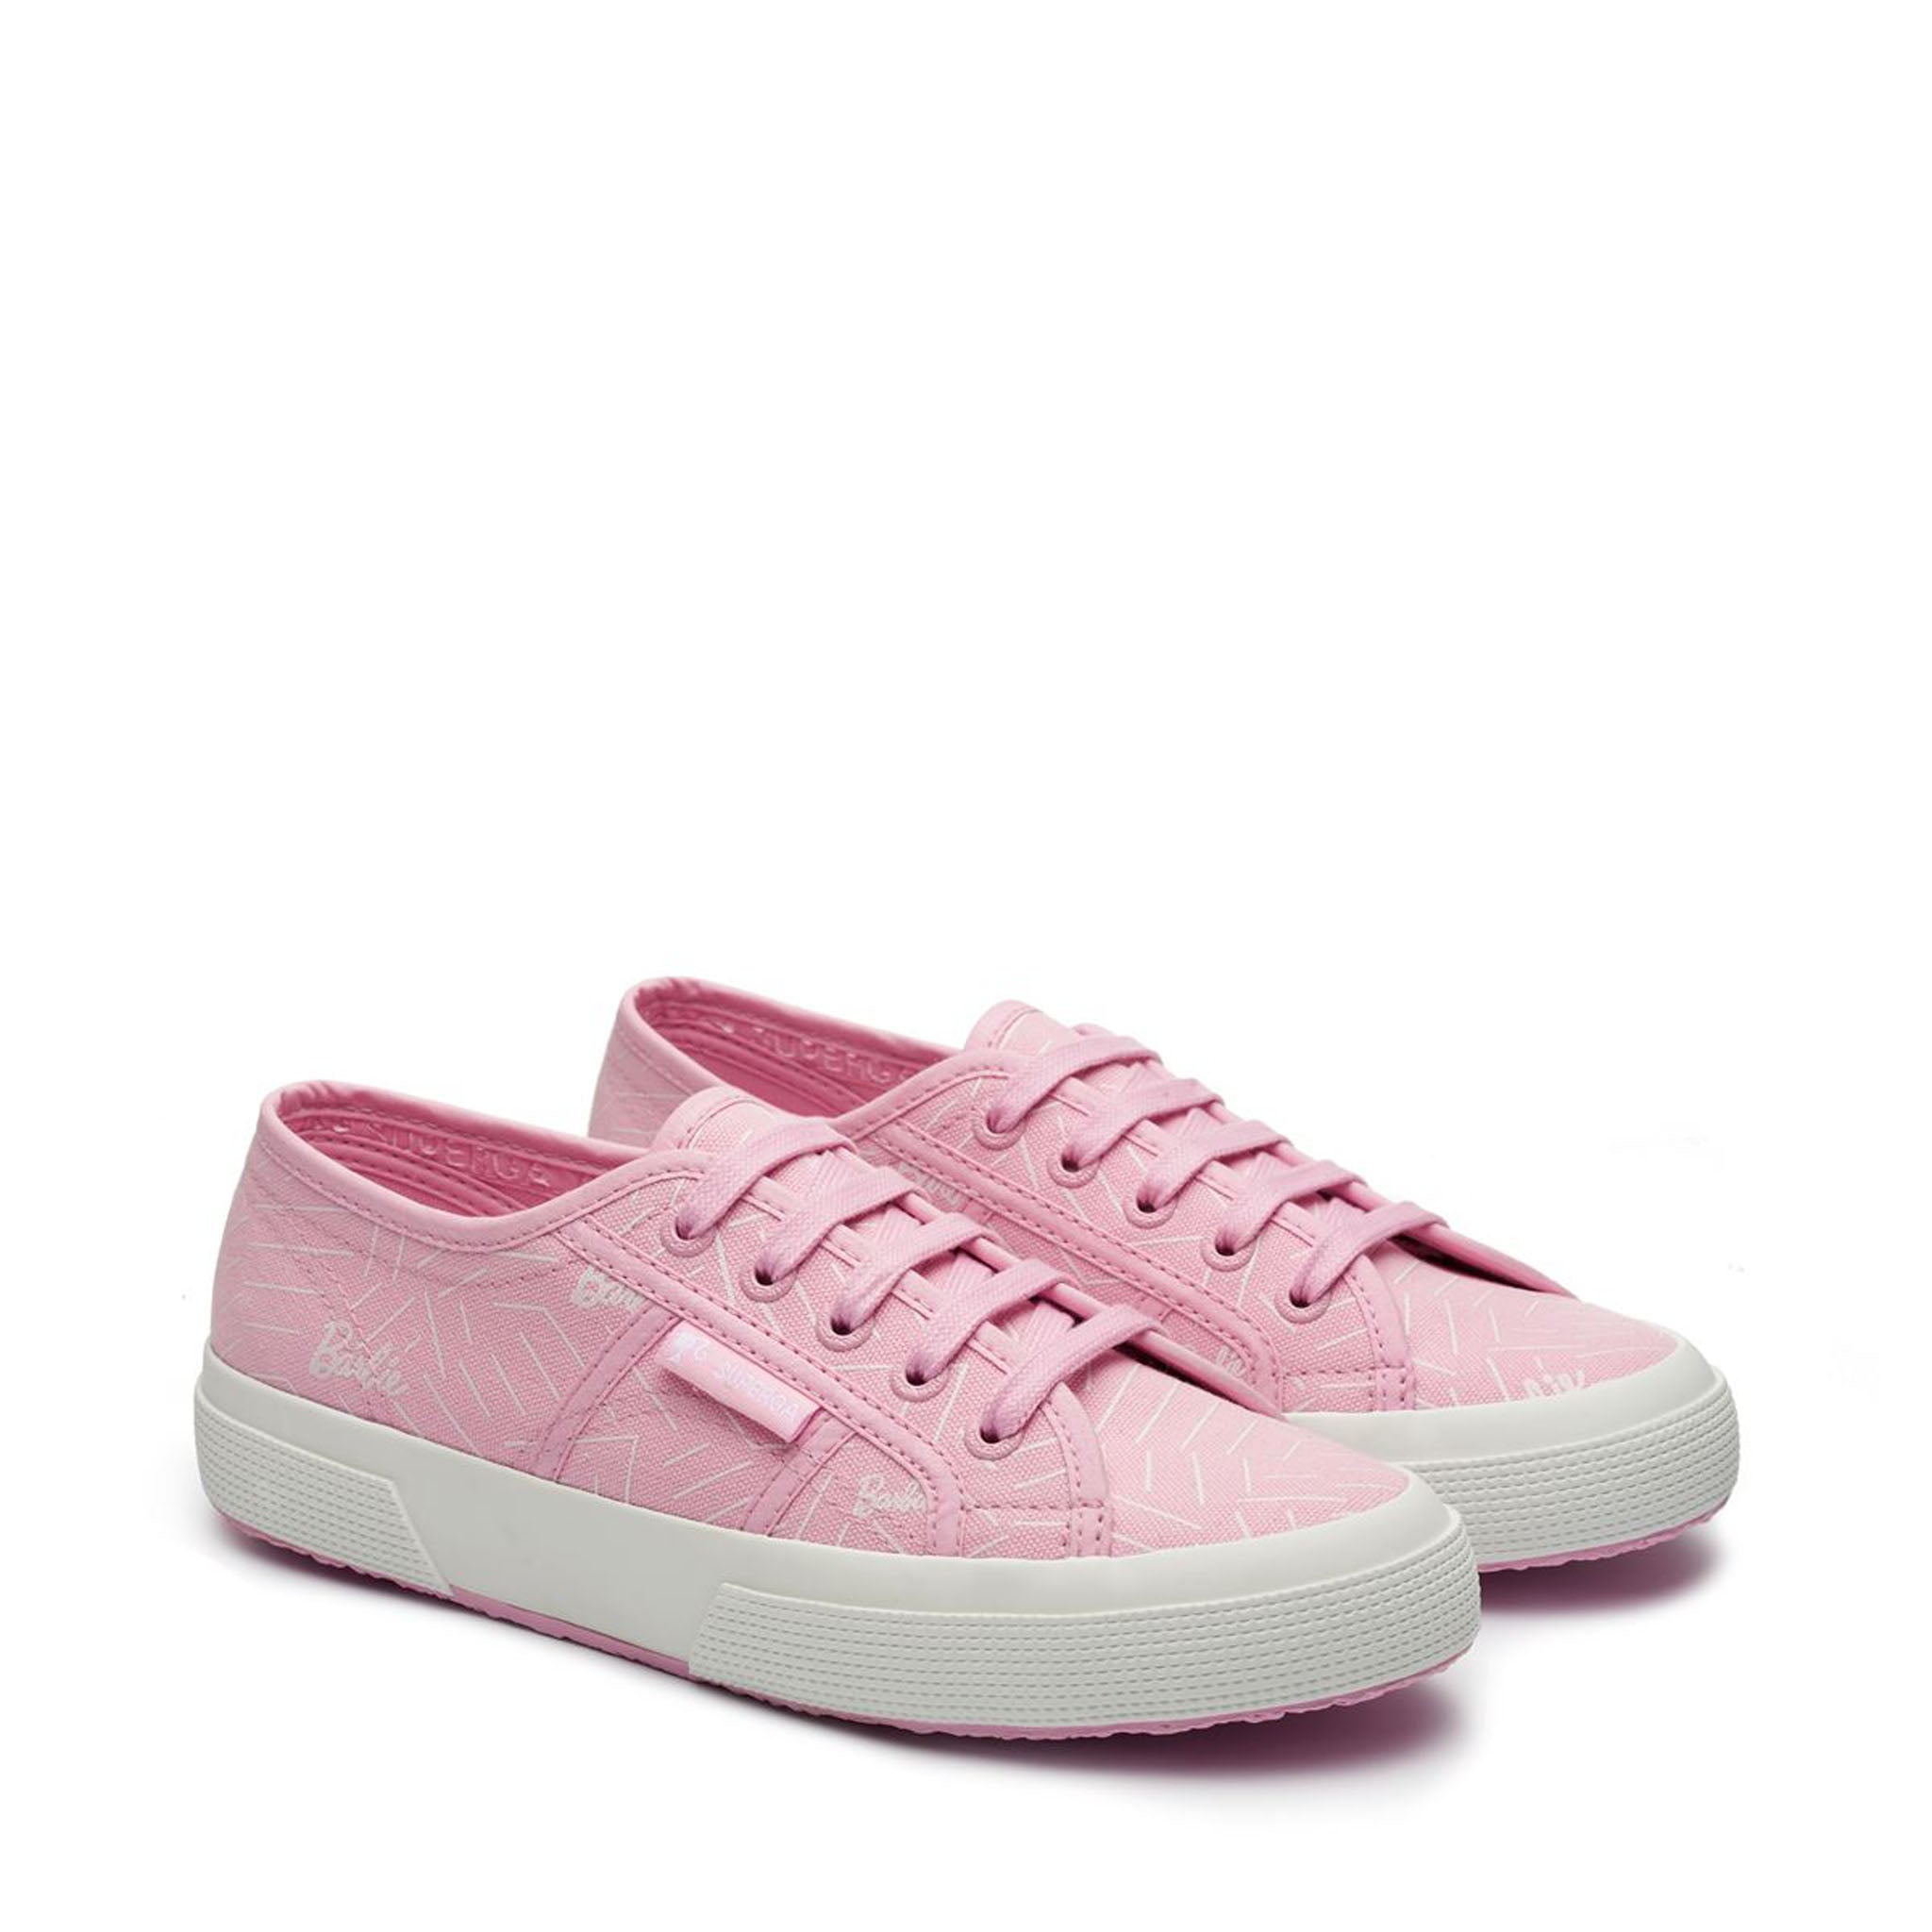 Superga 2750 Barbie Print Sneakers. Front view.